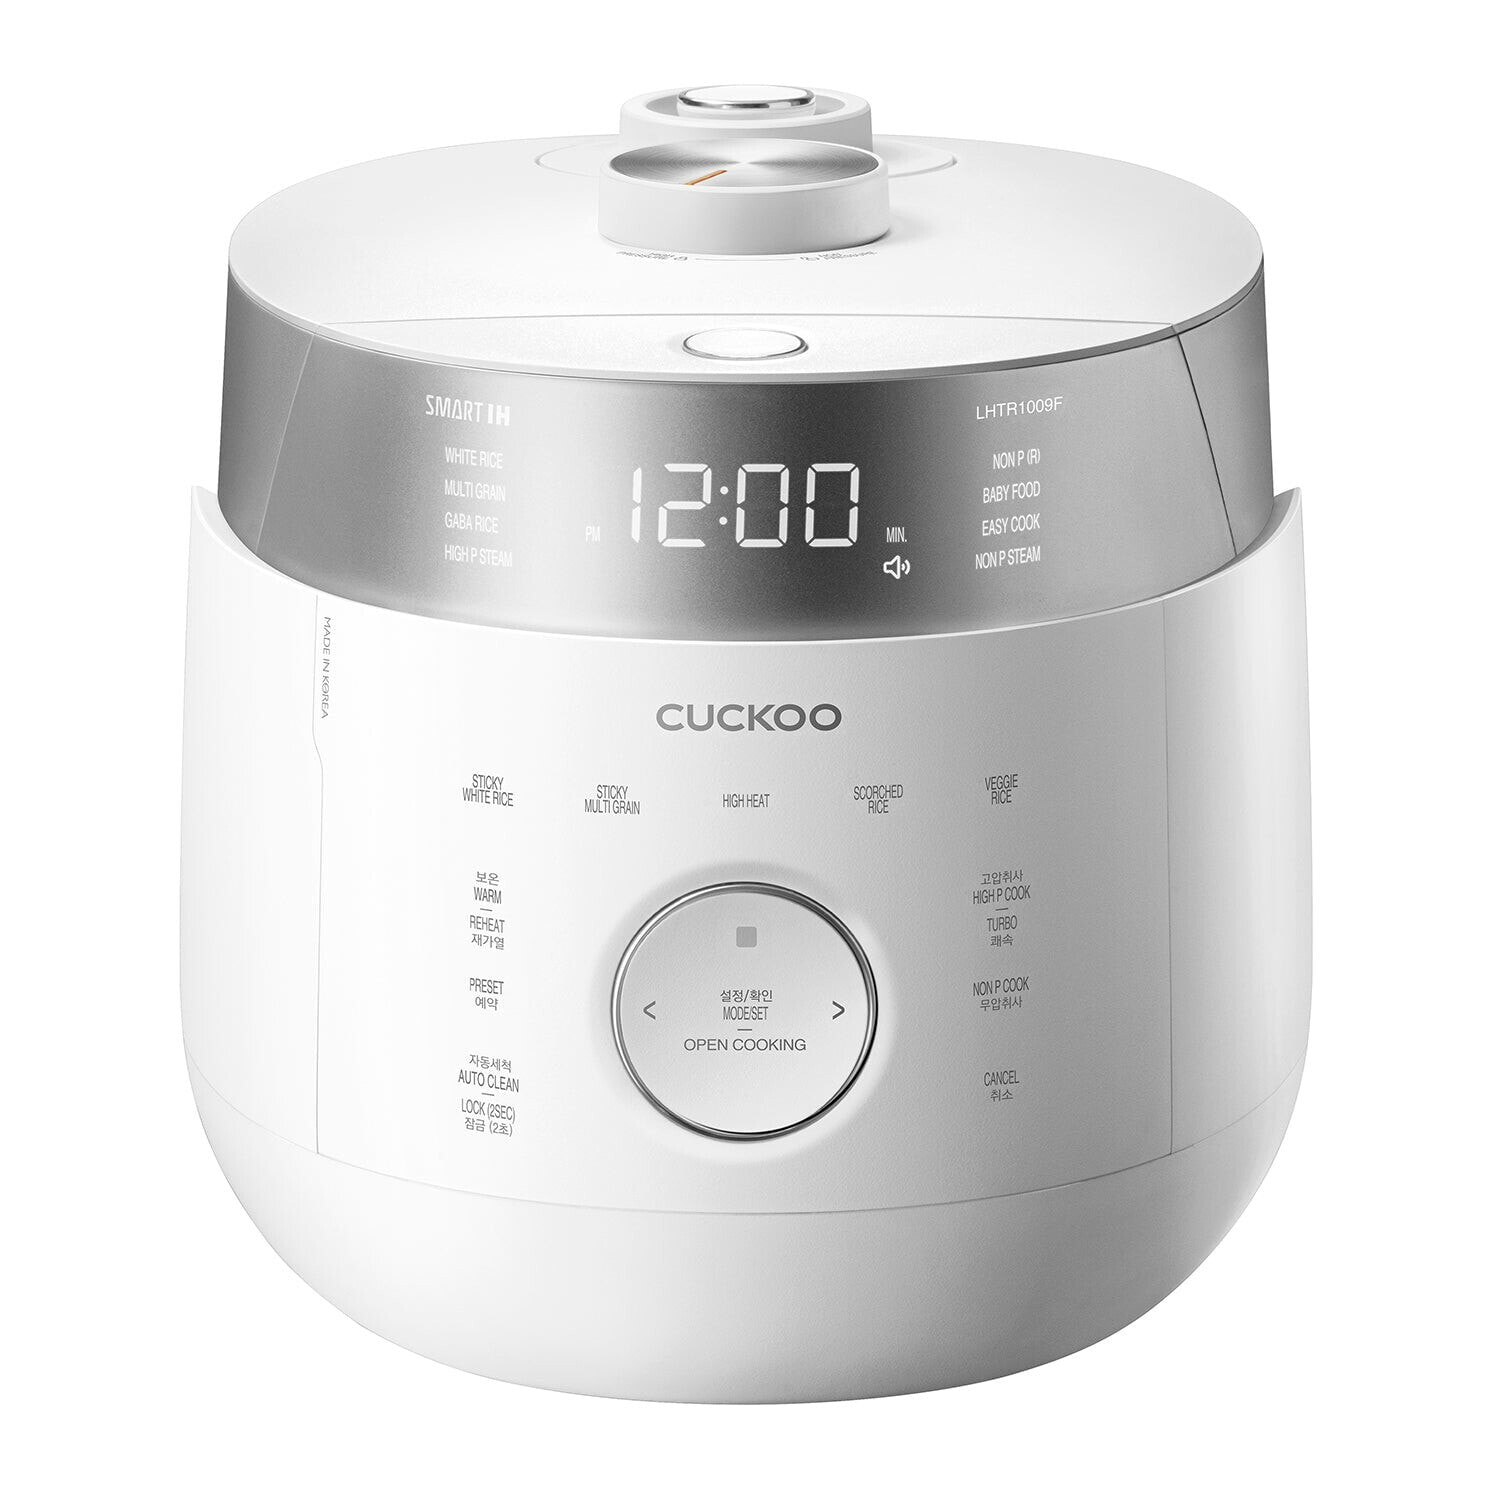 Cuckoo CRP-LHTR1009F - White - 1.8 L - Buttons - Rotary - Touch - Stainless steel - 1305 W - 120 V